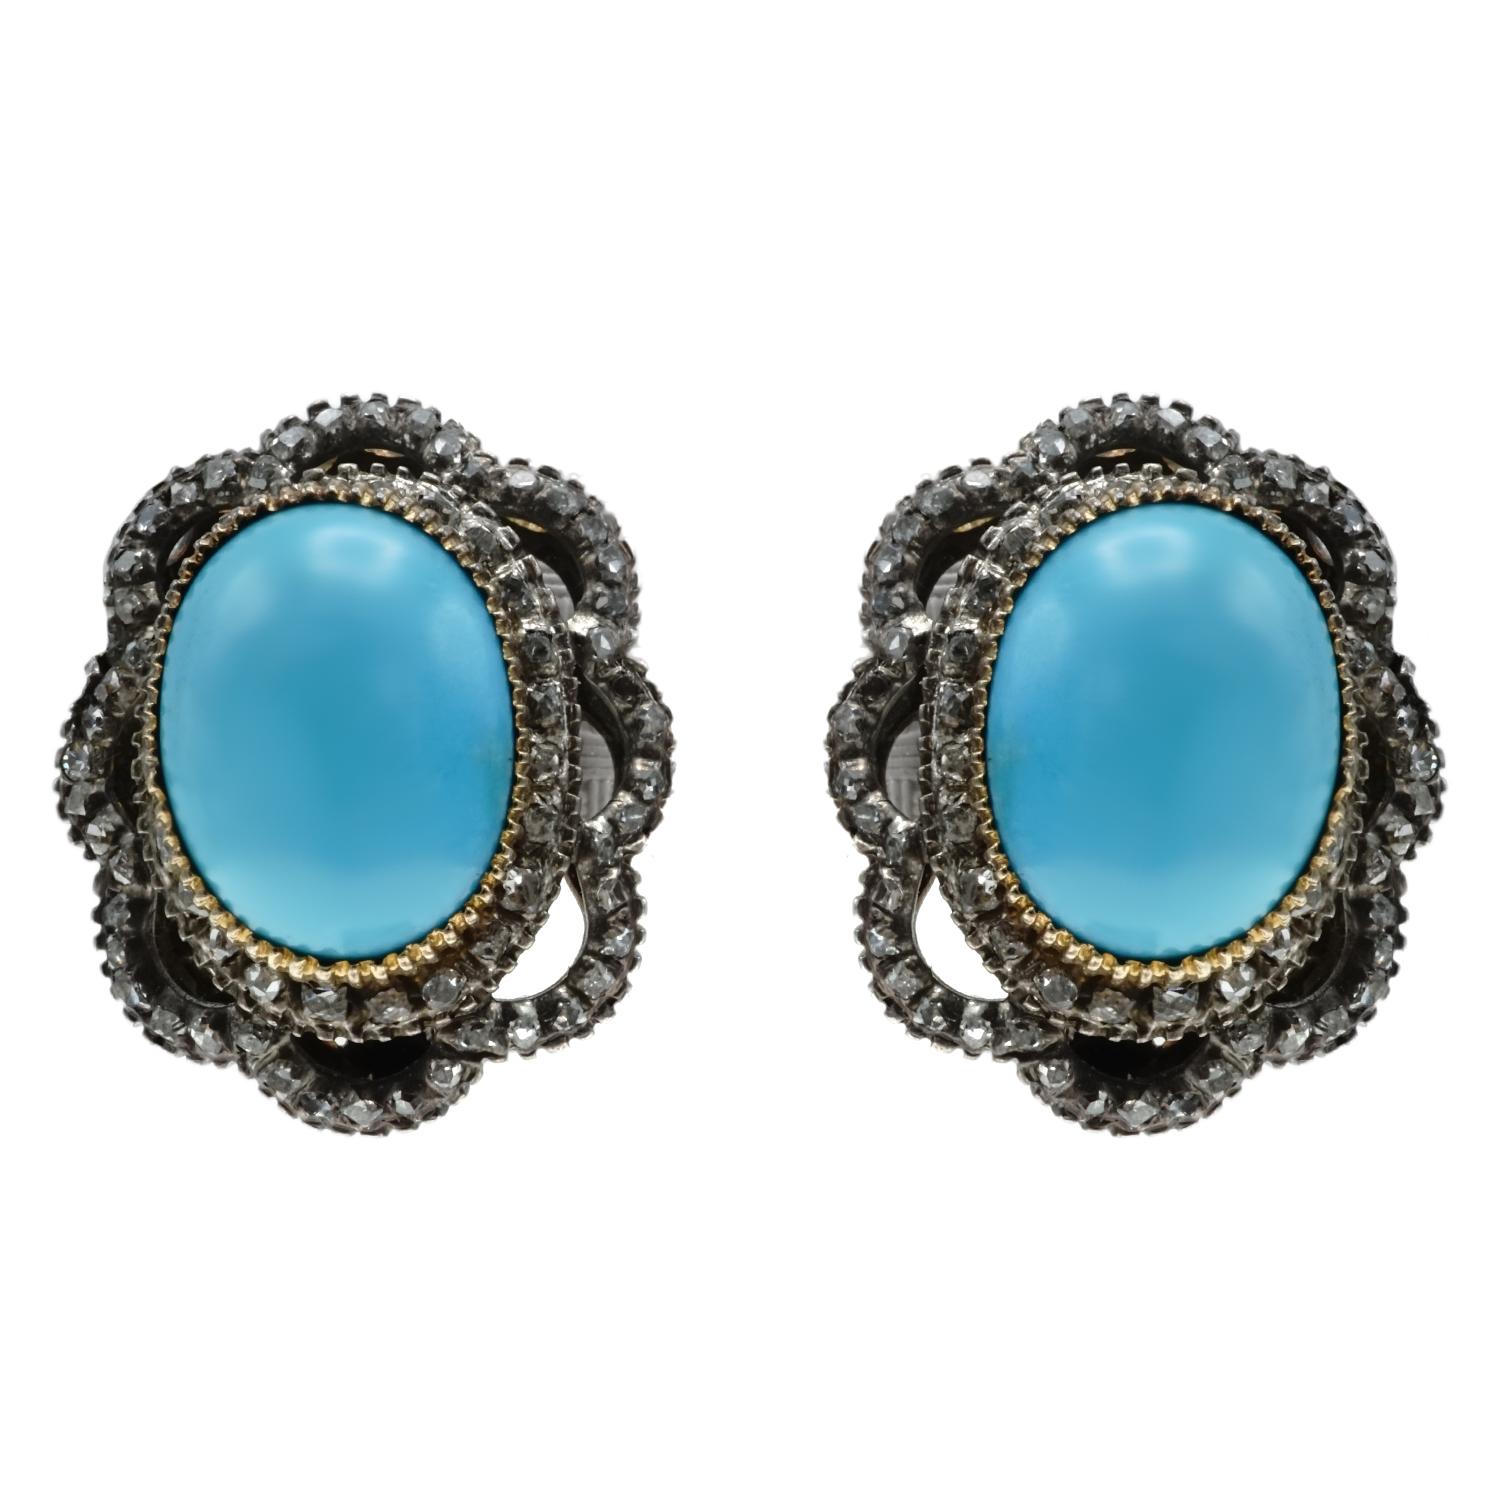 Crafted in 18 karat and silver featuring 2 Sleeping Beauty Persian Turquoise oval cabochons measures 13.00 x 9.90 mm  surrounded by rose and french cut diamonds.  Weight 15.2 gr./9.8 dwt. 

Diamond:  Estimated weight 1.25 - 1.50 carats
Earring